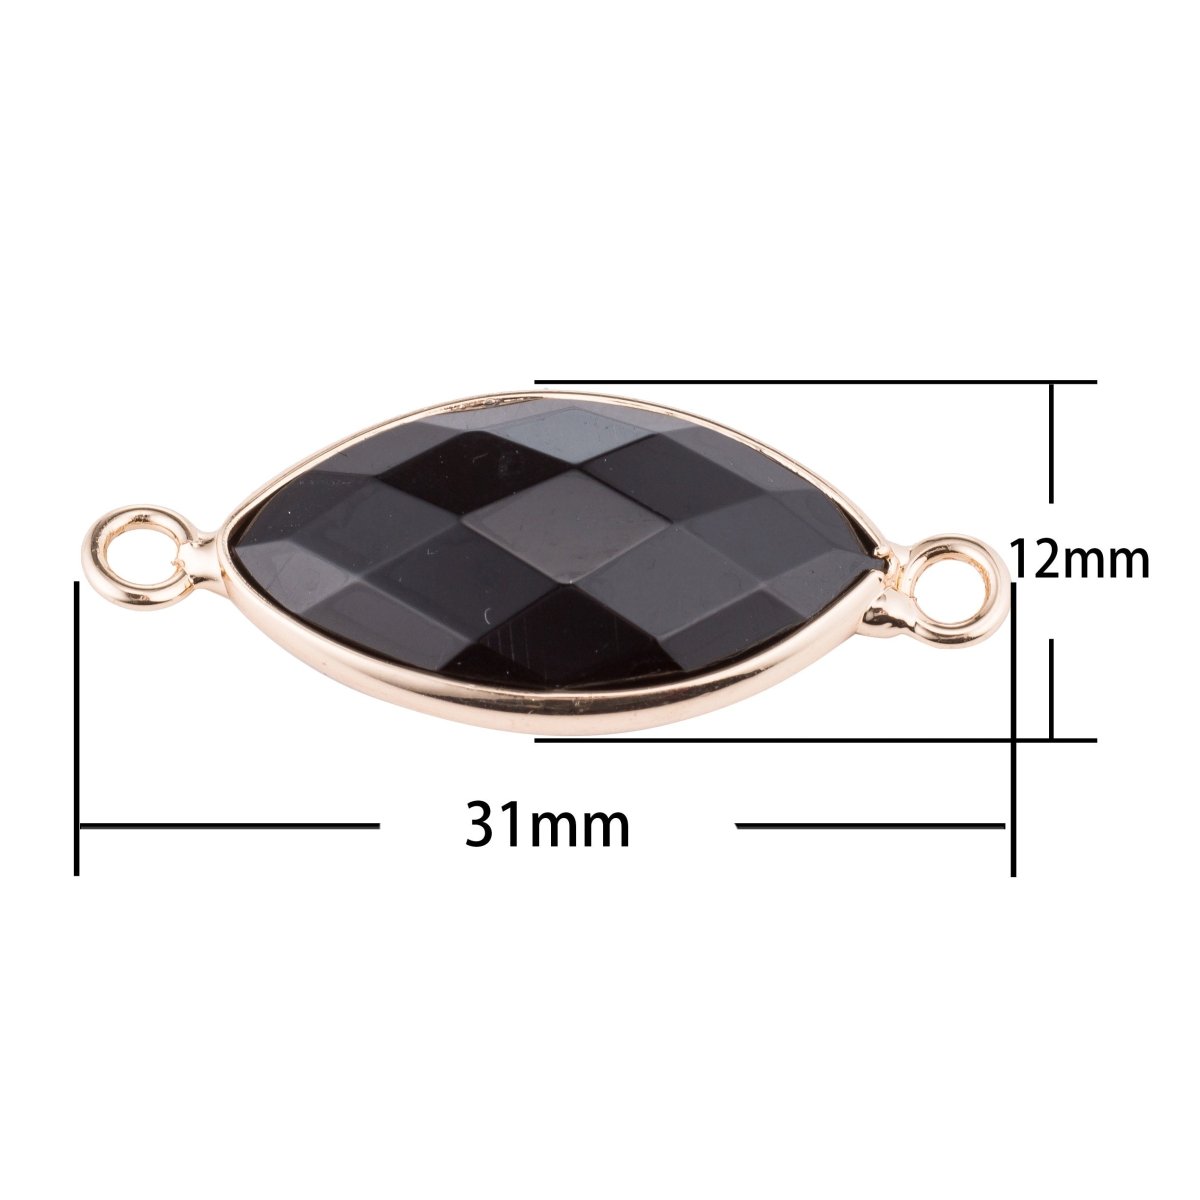 Gold Edge Jet Black Marquise Cut Shape Classic Gemstone Women DIY Craft Bracelet Charm Bead Connector Pendant Finding for Jewelry Making F-795 - DLUXCA